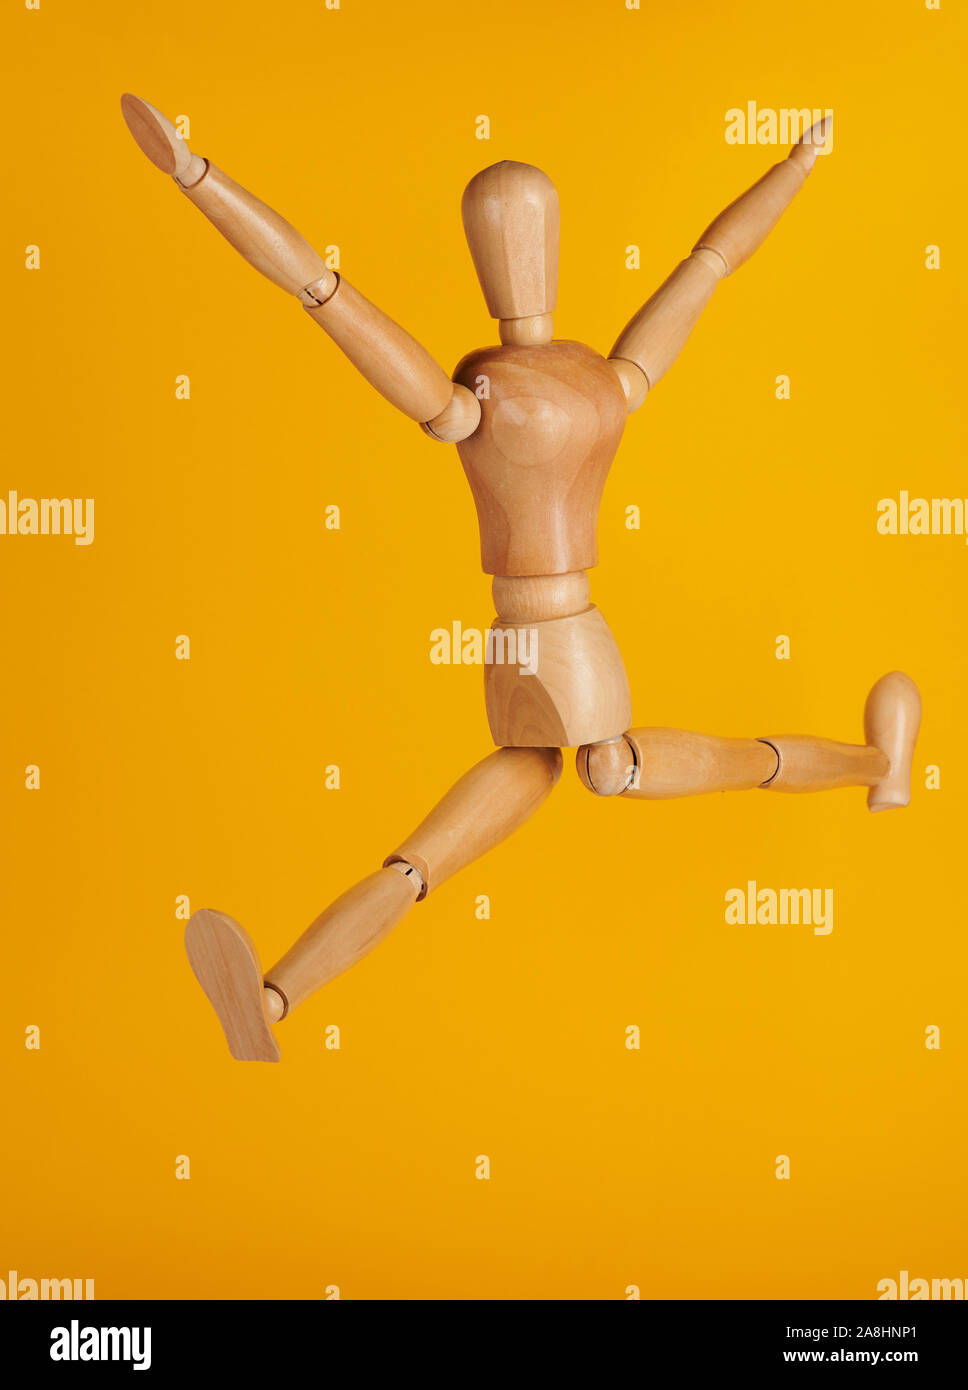 Wooden man in jumping pose isolated on yellow background Stock Photo